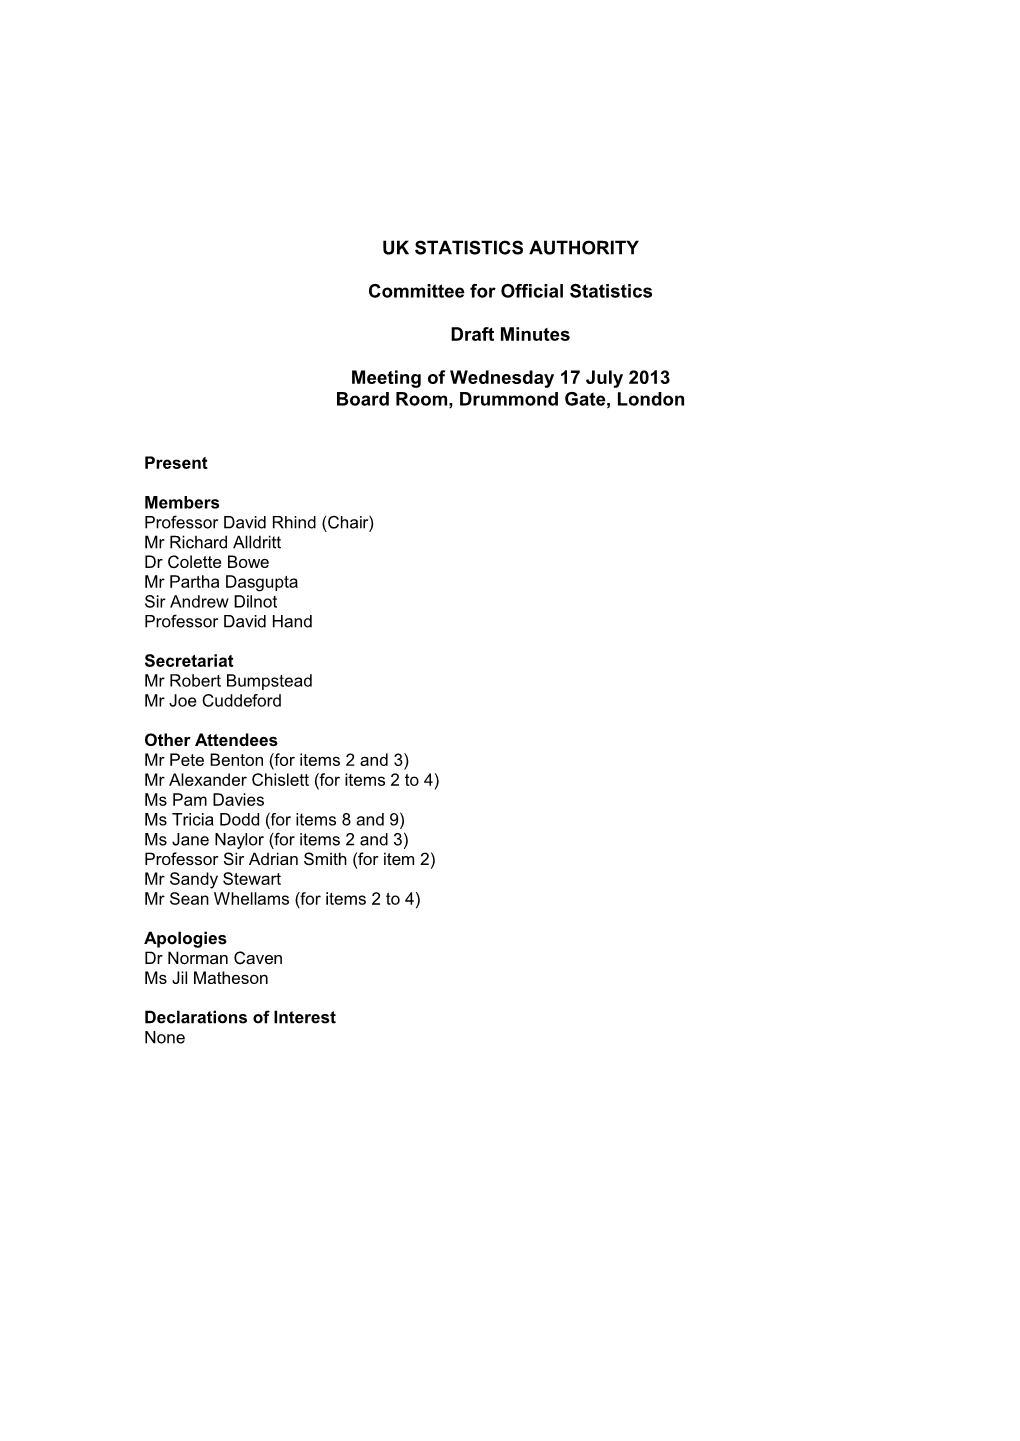 Papers from the Committee for Official Statistics Meeting on 17 July 2013